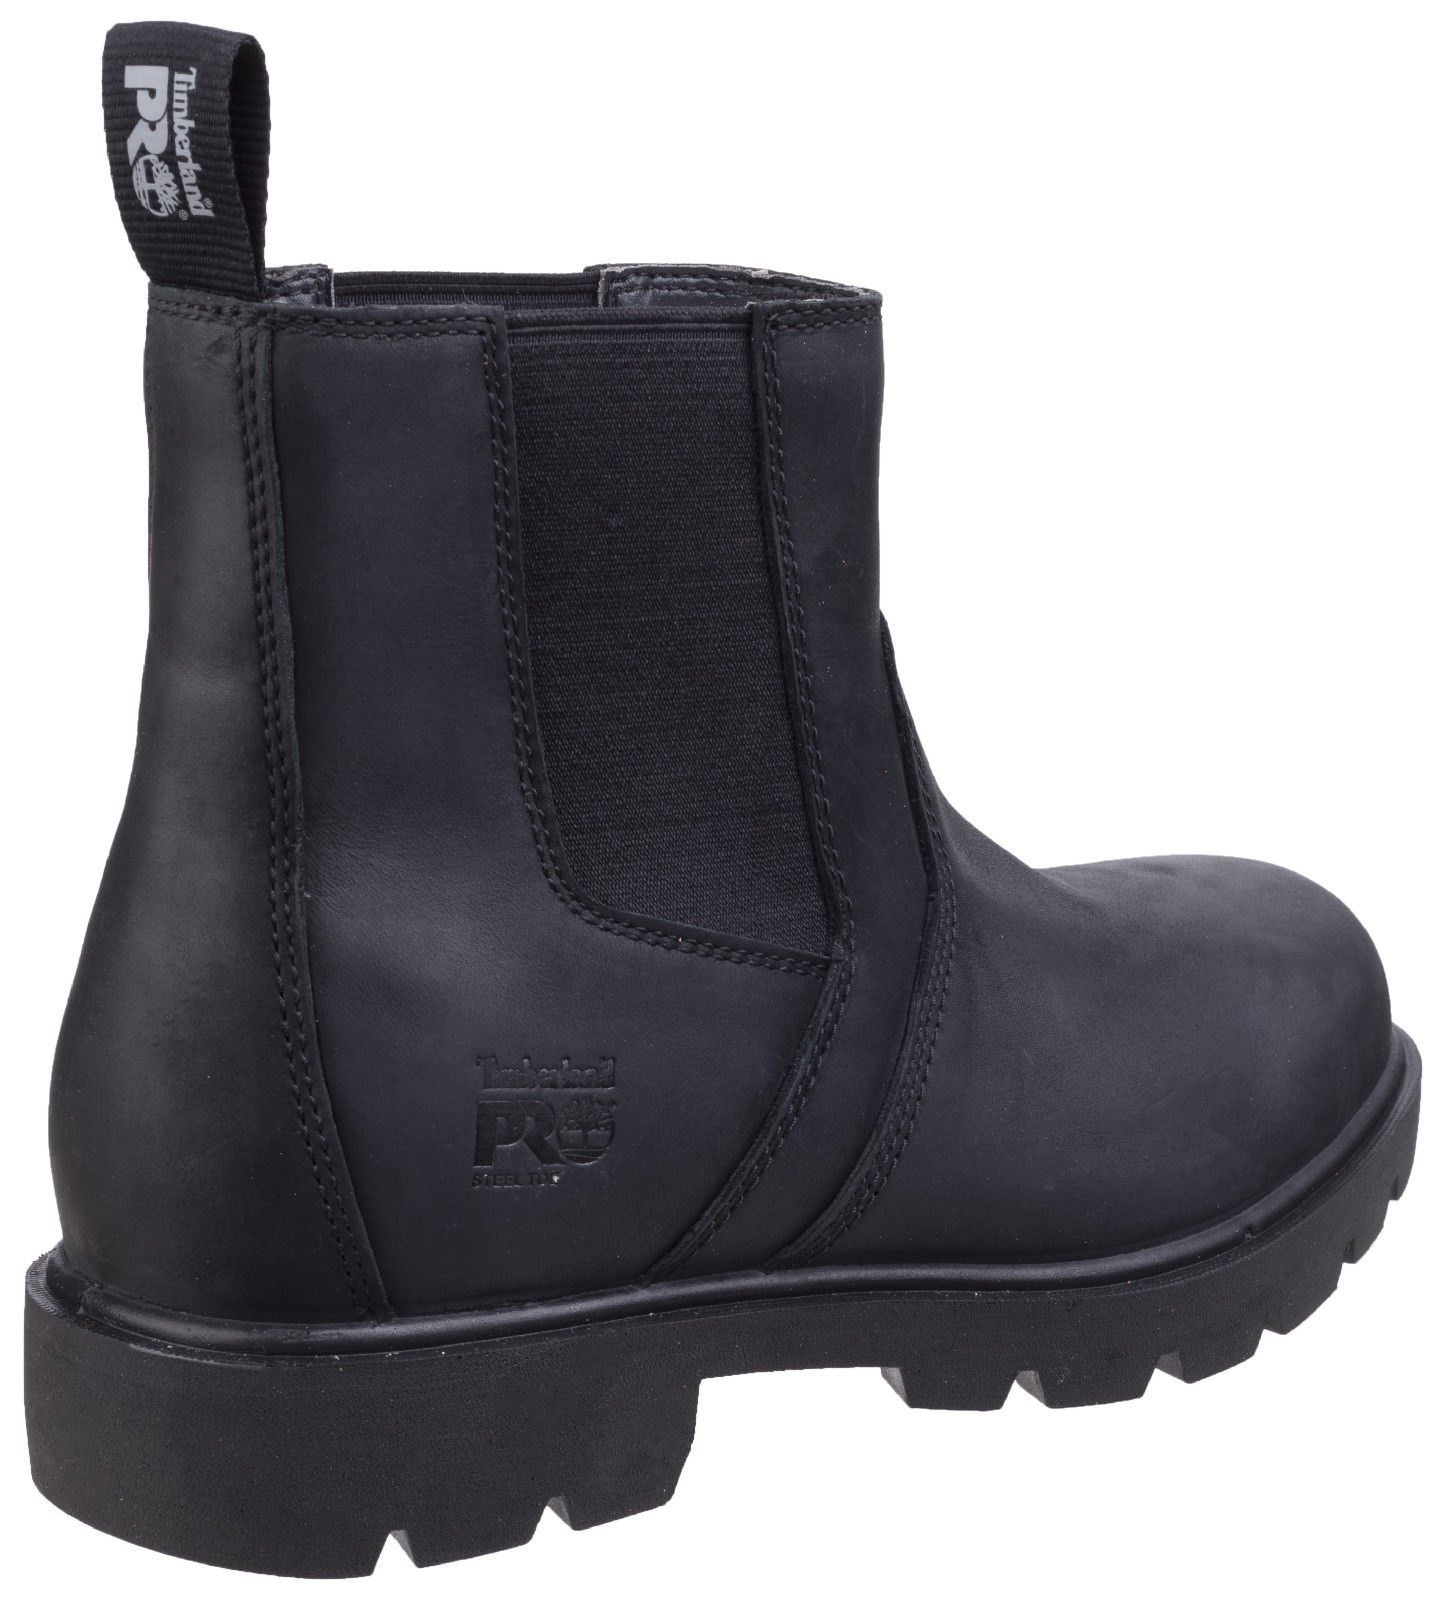 Timberland Sawhorse Dealer boot with impact and compression resistant toe cap, comfort and durabilityMens premium full grain leather Chelsea. 
Slip resistant wide tread lug outsole. 
Single Density Open Cell Polyurethane footbed. 
Mesh lining for added breathability and comfort.. 
Steel Toe.